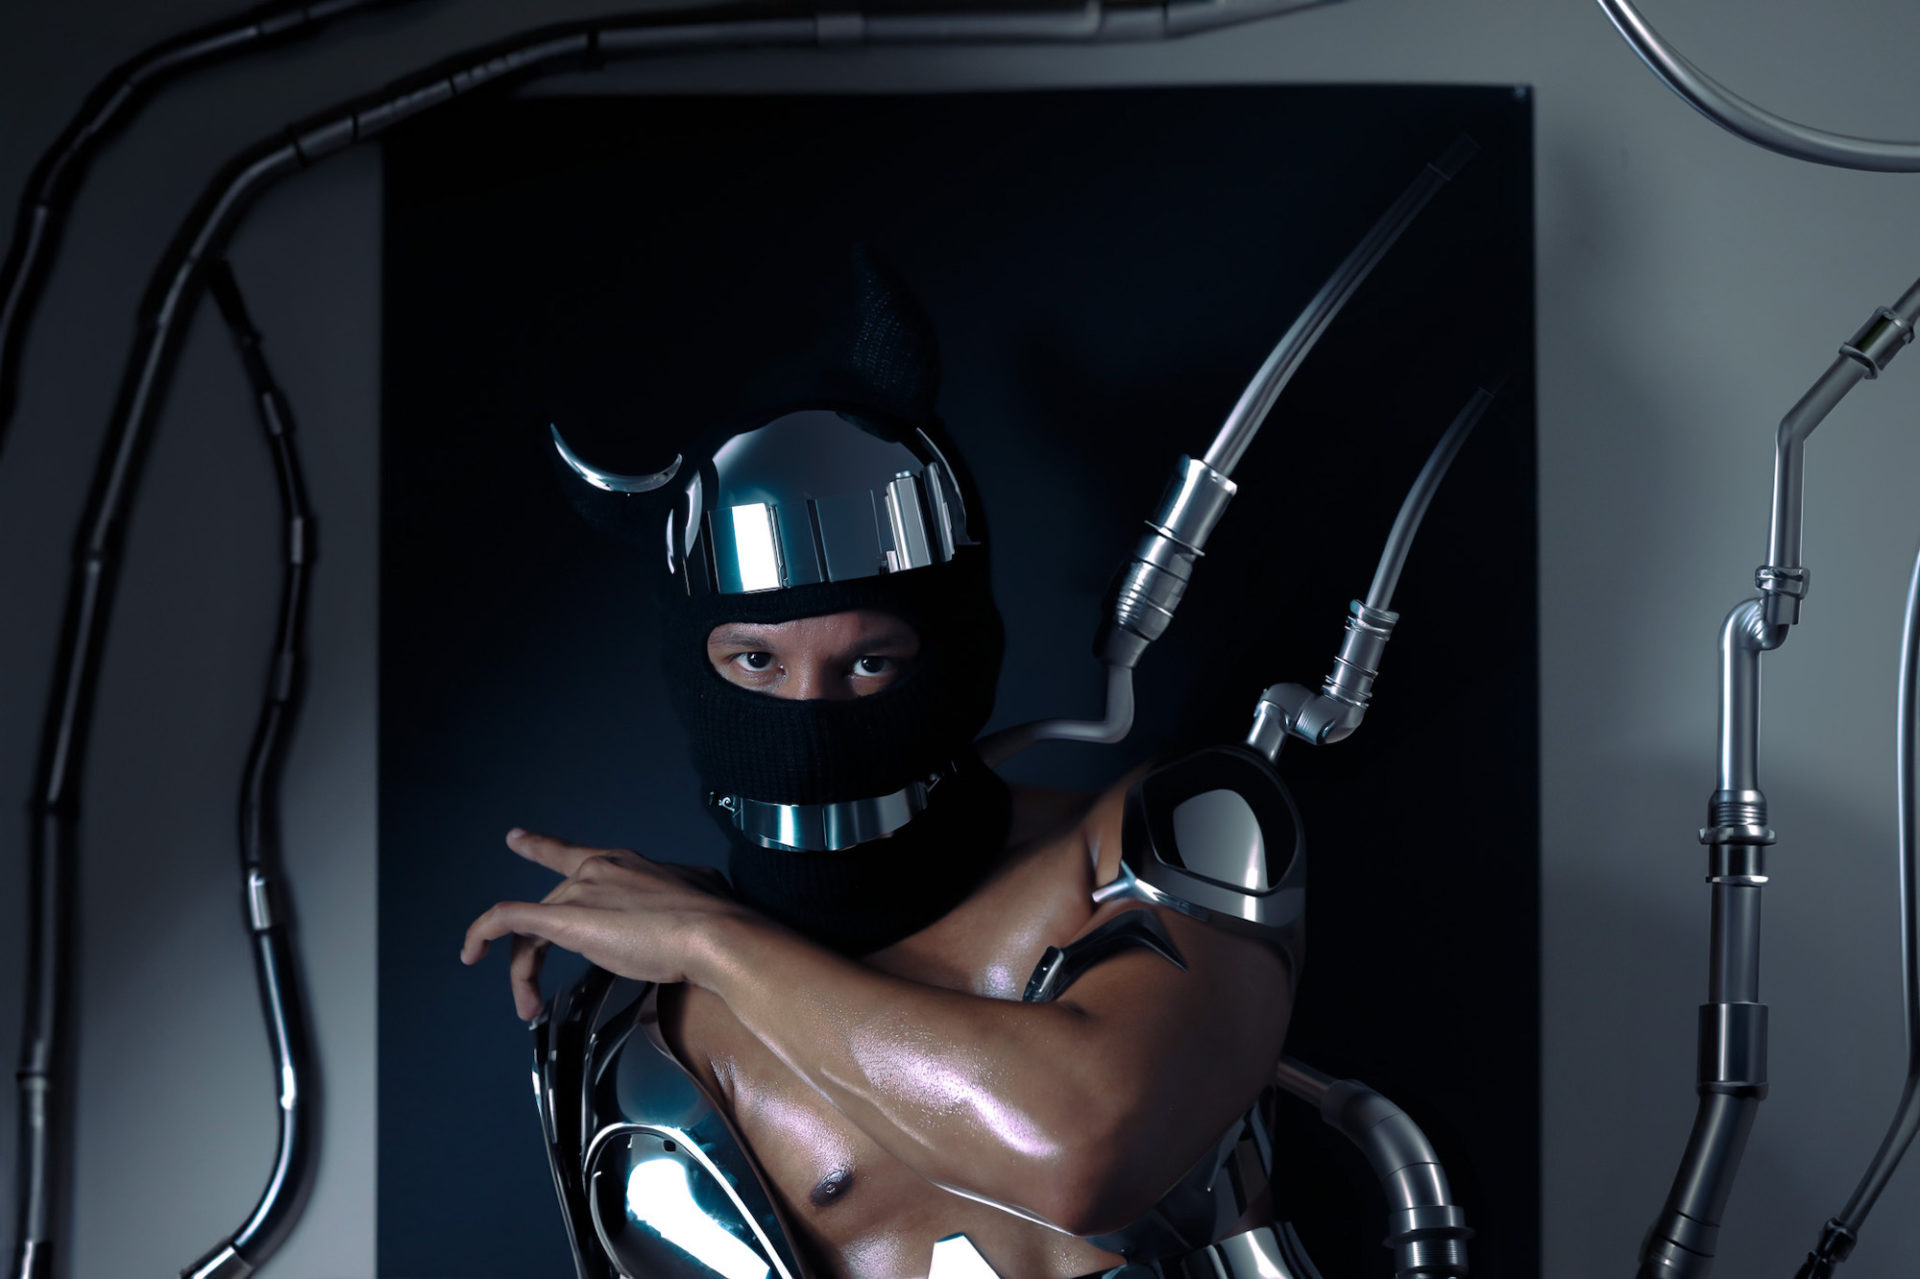 Portrait by Marcus Flinn. He is shirtless, with a chrome helmet and wearing large chrome futuristic pieces on his arms. The photo is mostly grey and black. He is standing in from of a black backdrop, with grey and tubing framing him